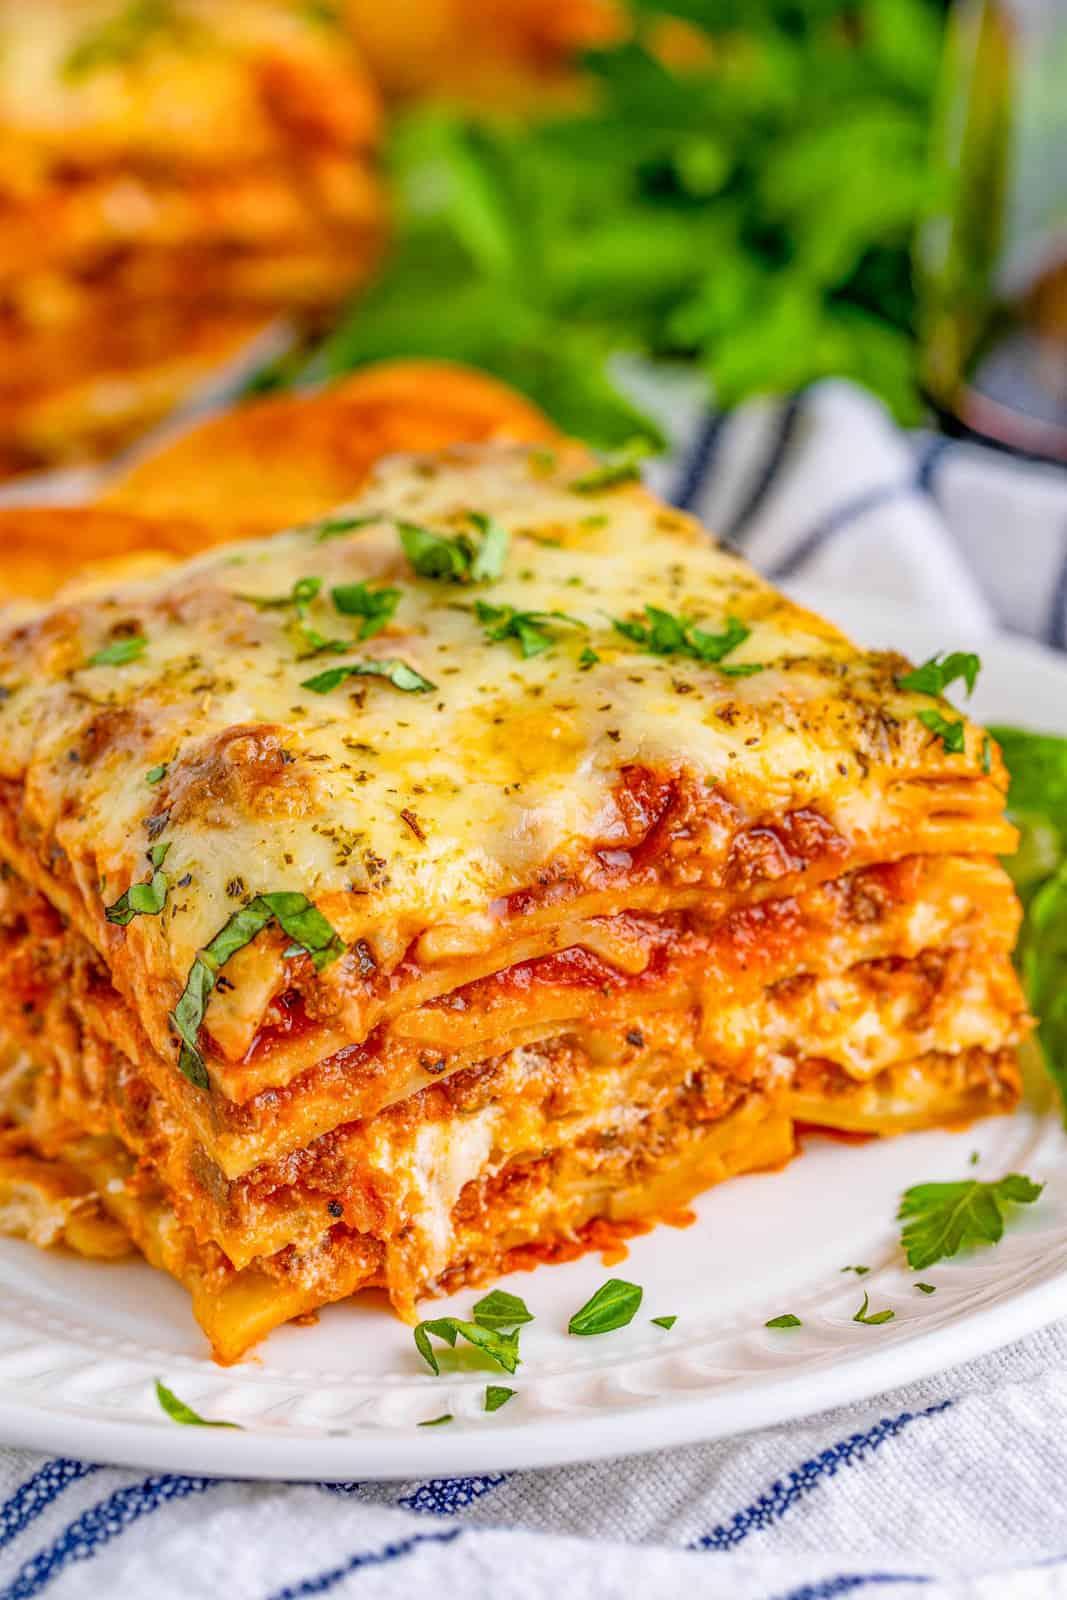 A slice of The Best Lasagna on white plate topped with herbs.